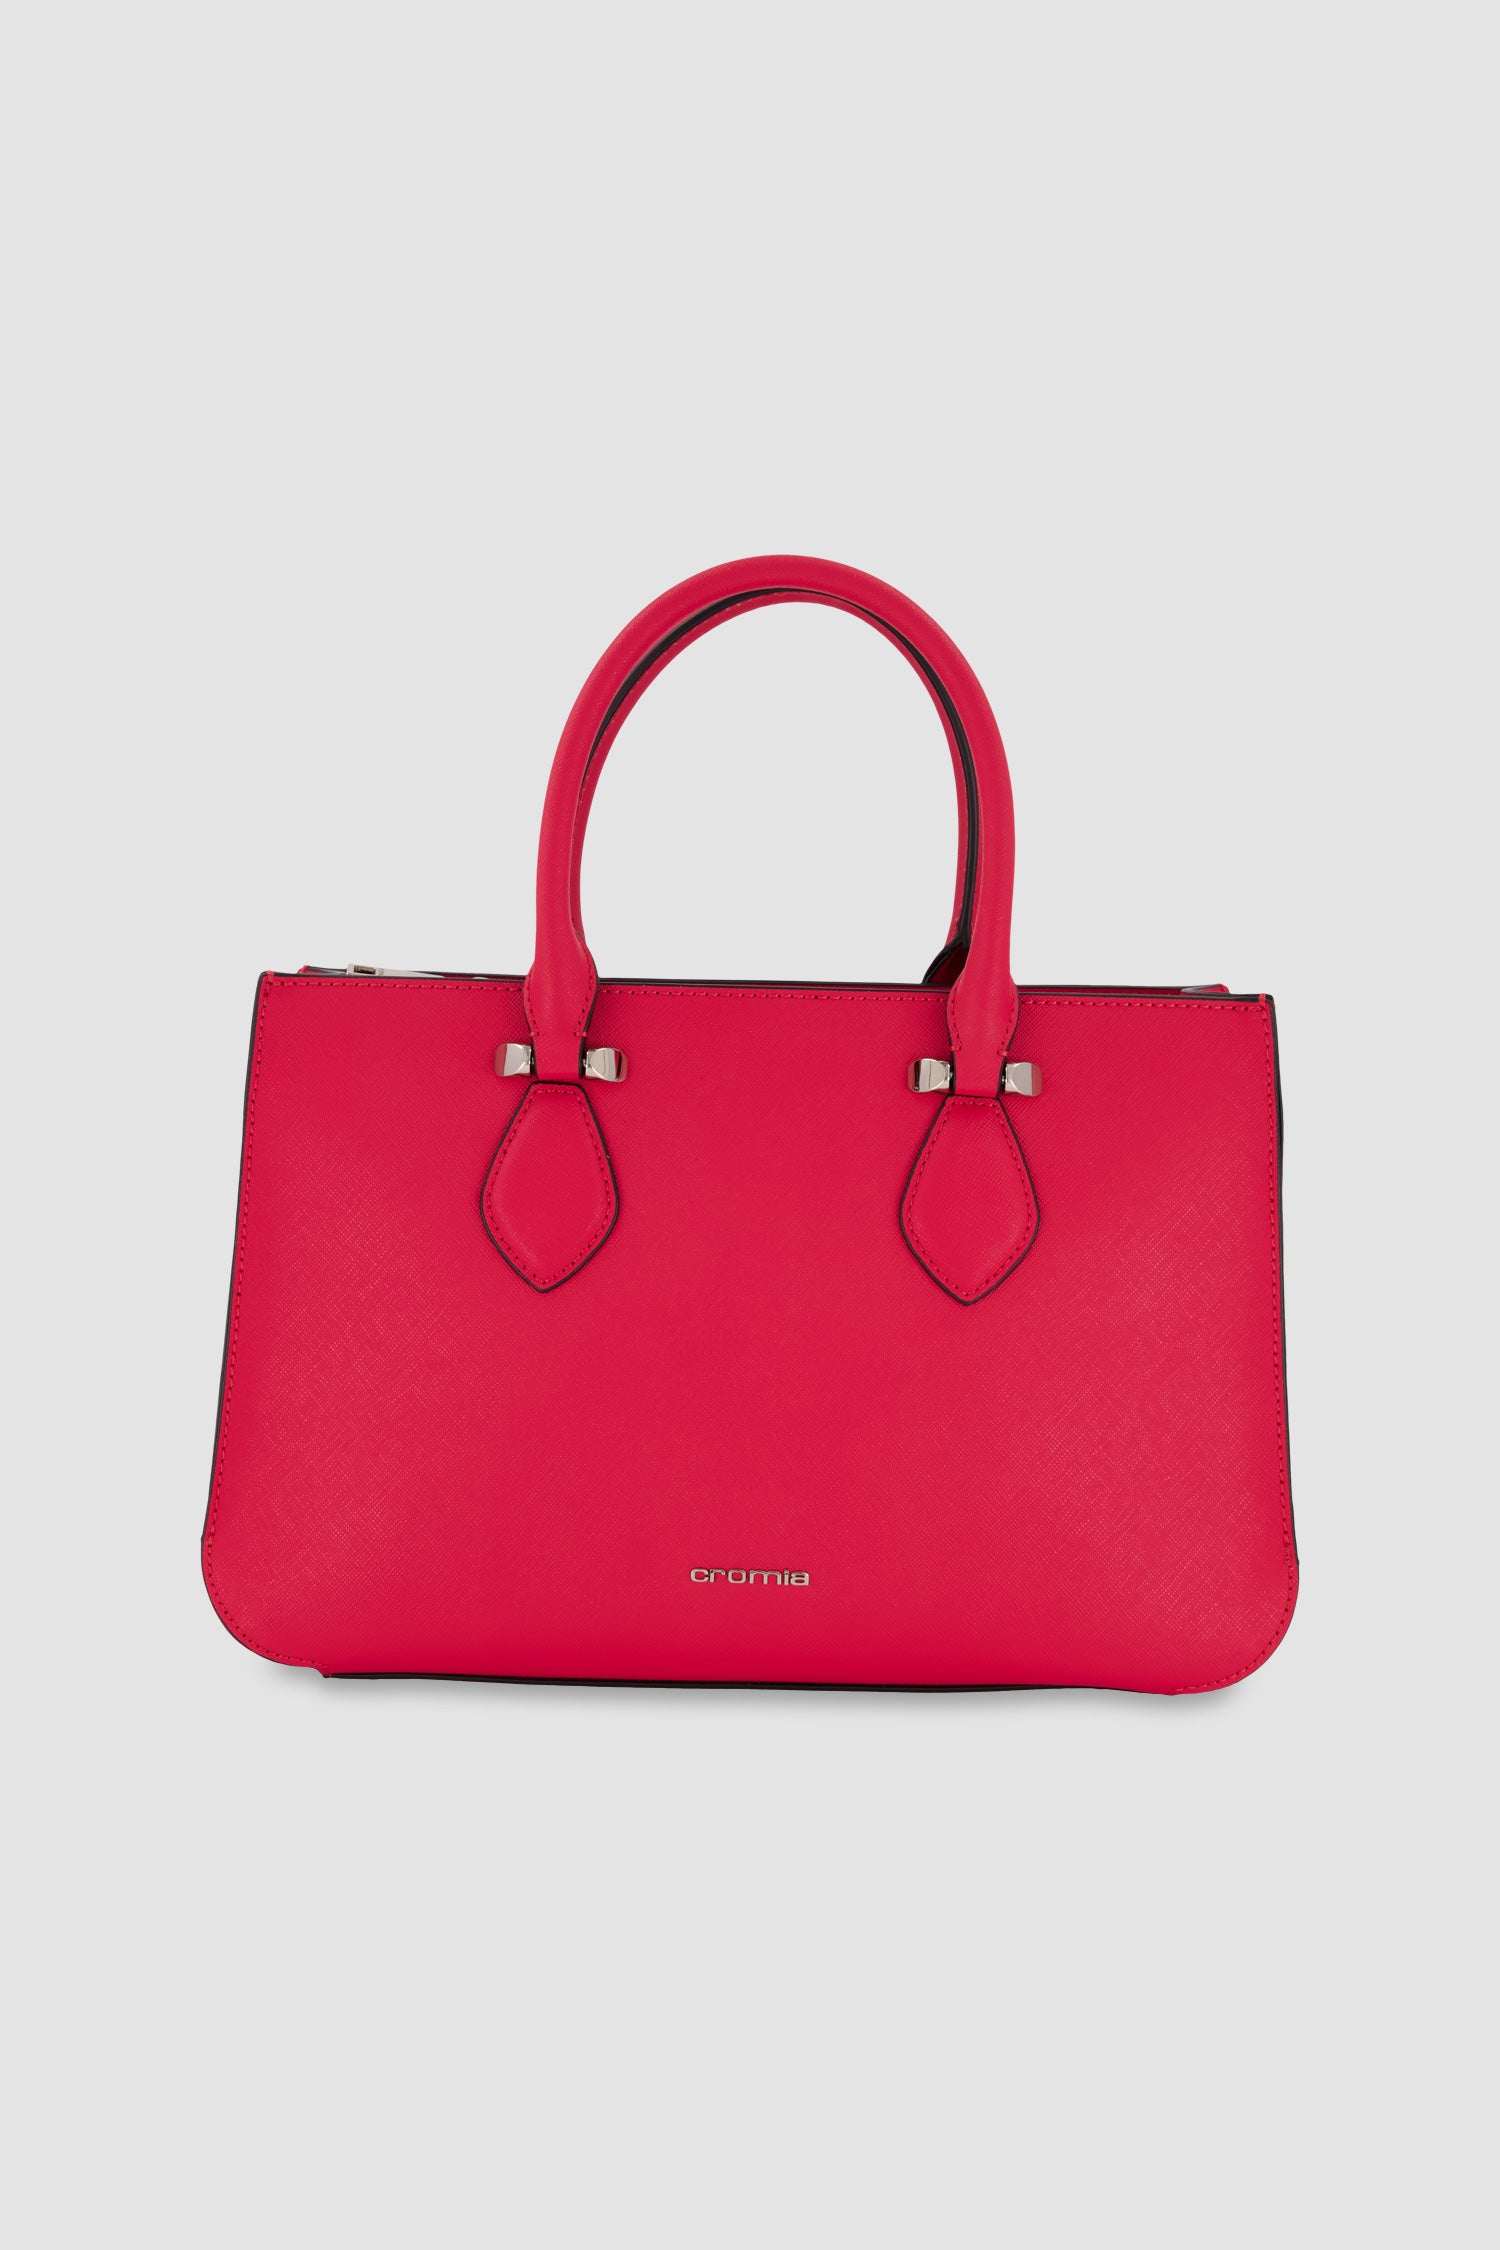 Shop Branded Luxury Women's Bags From Top Designers